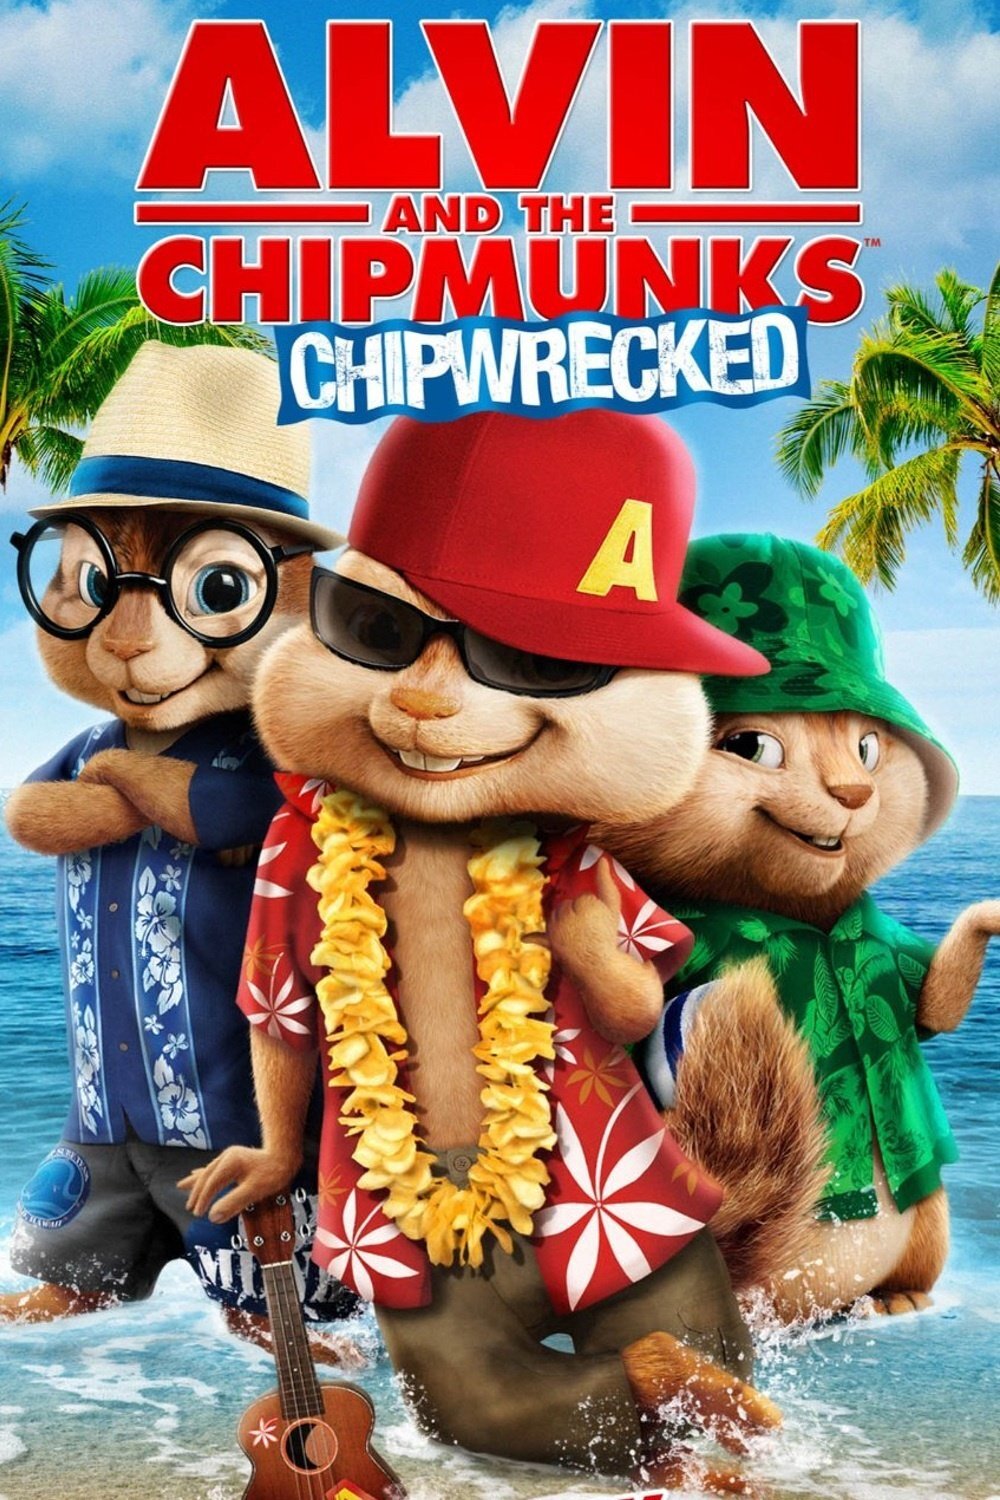 alvin and the chipmunks chiprecked.jpg